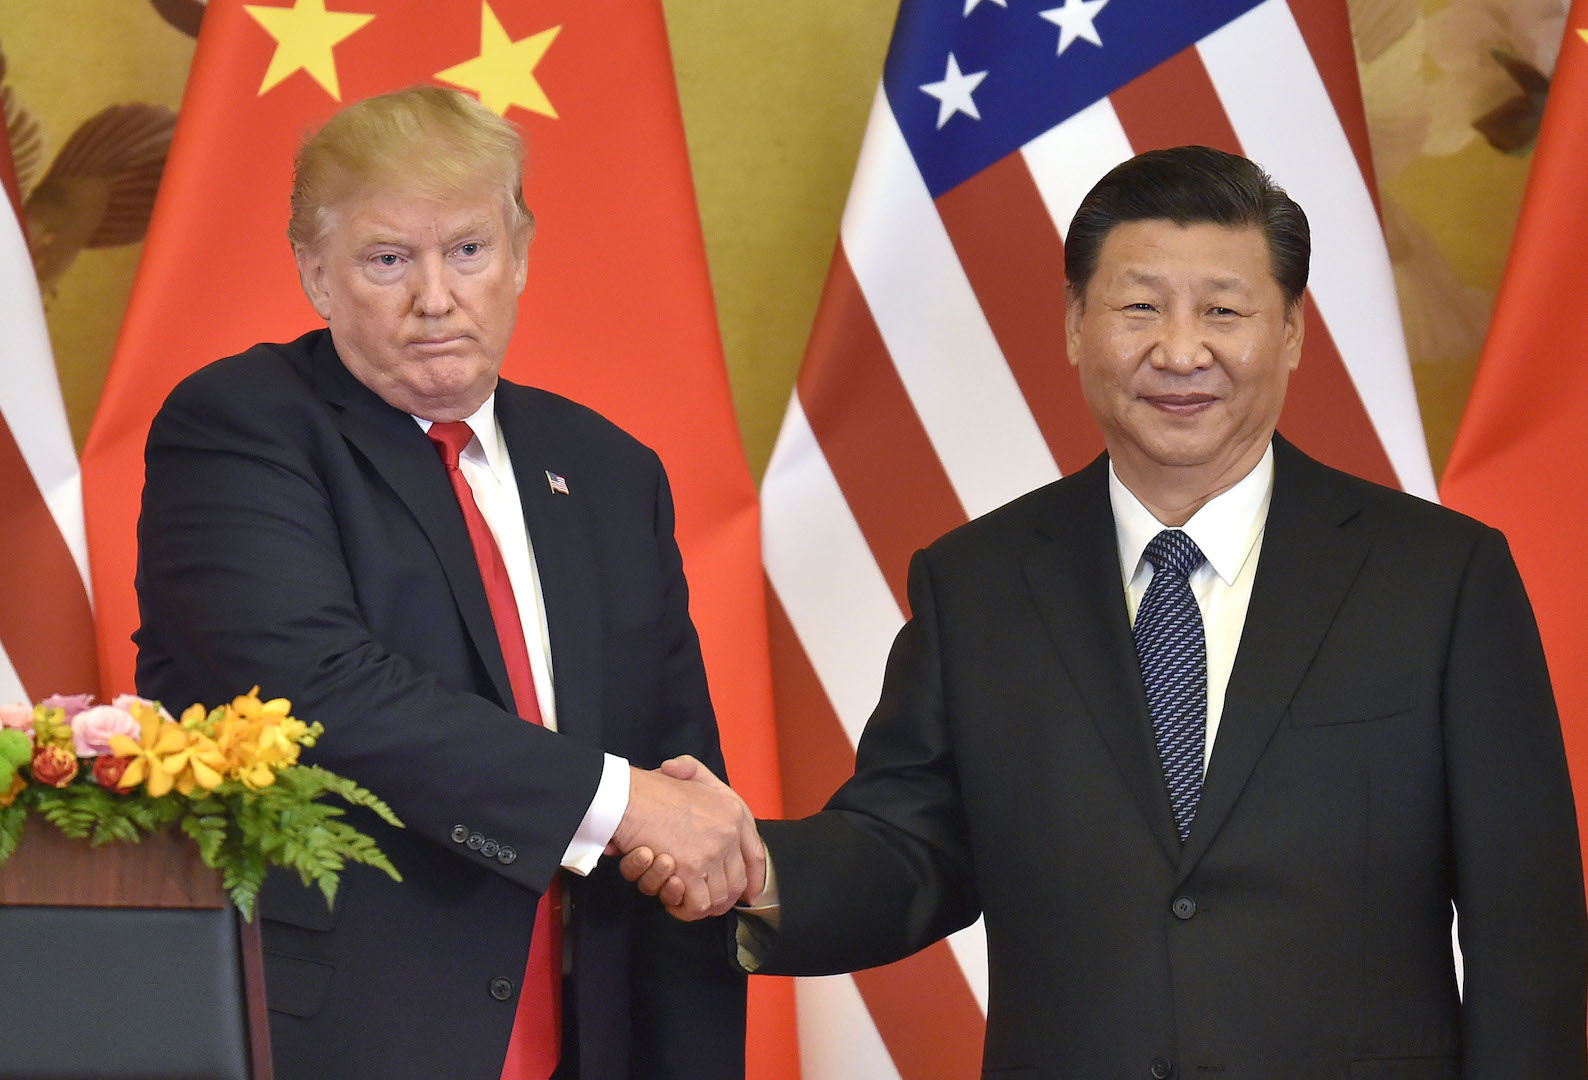 Summit between U.S. and Chinese leaders